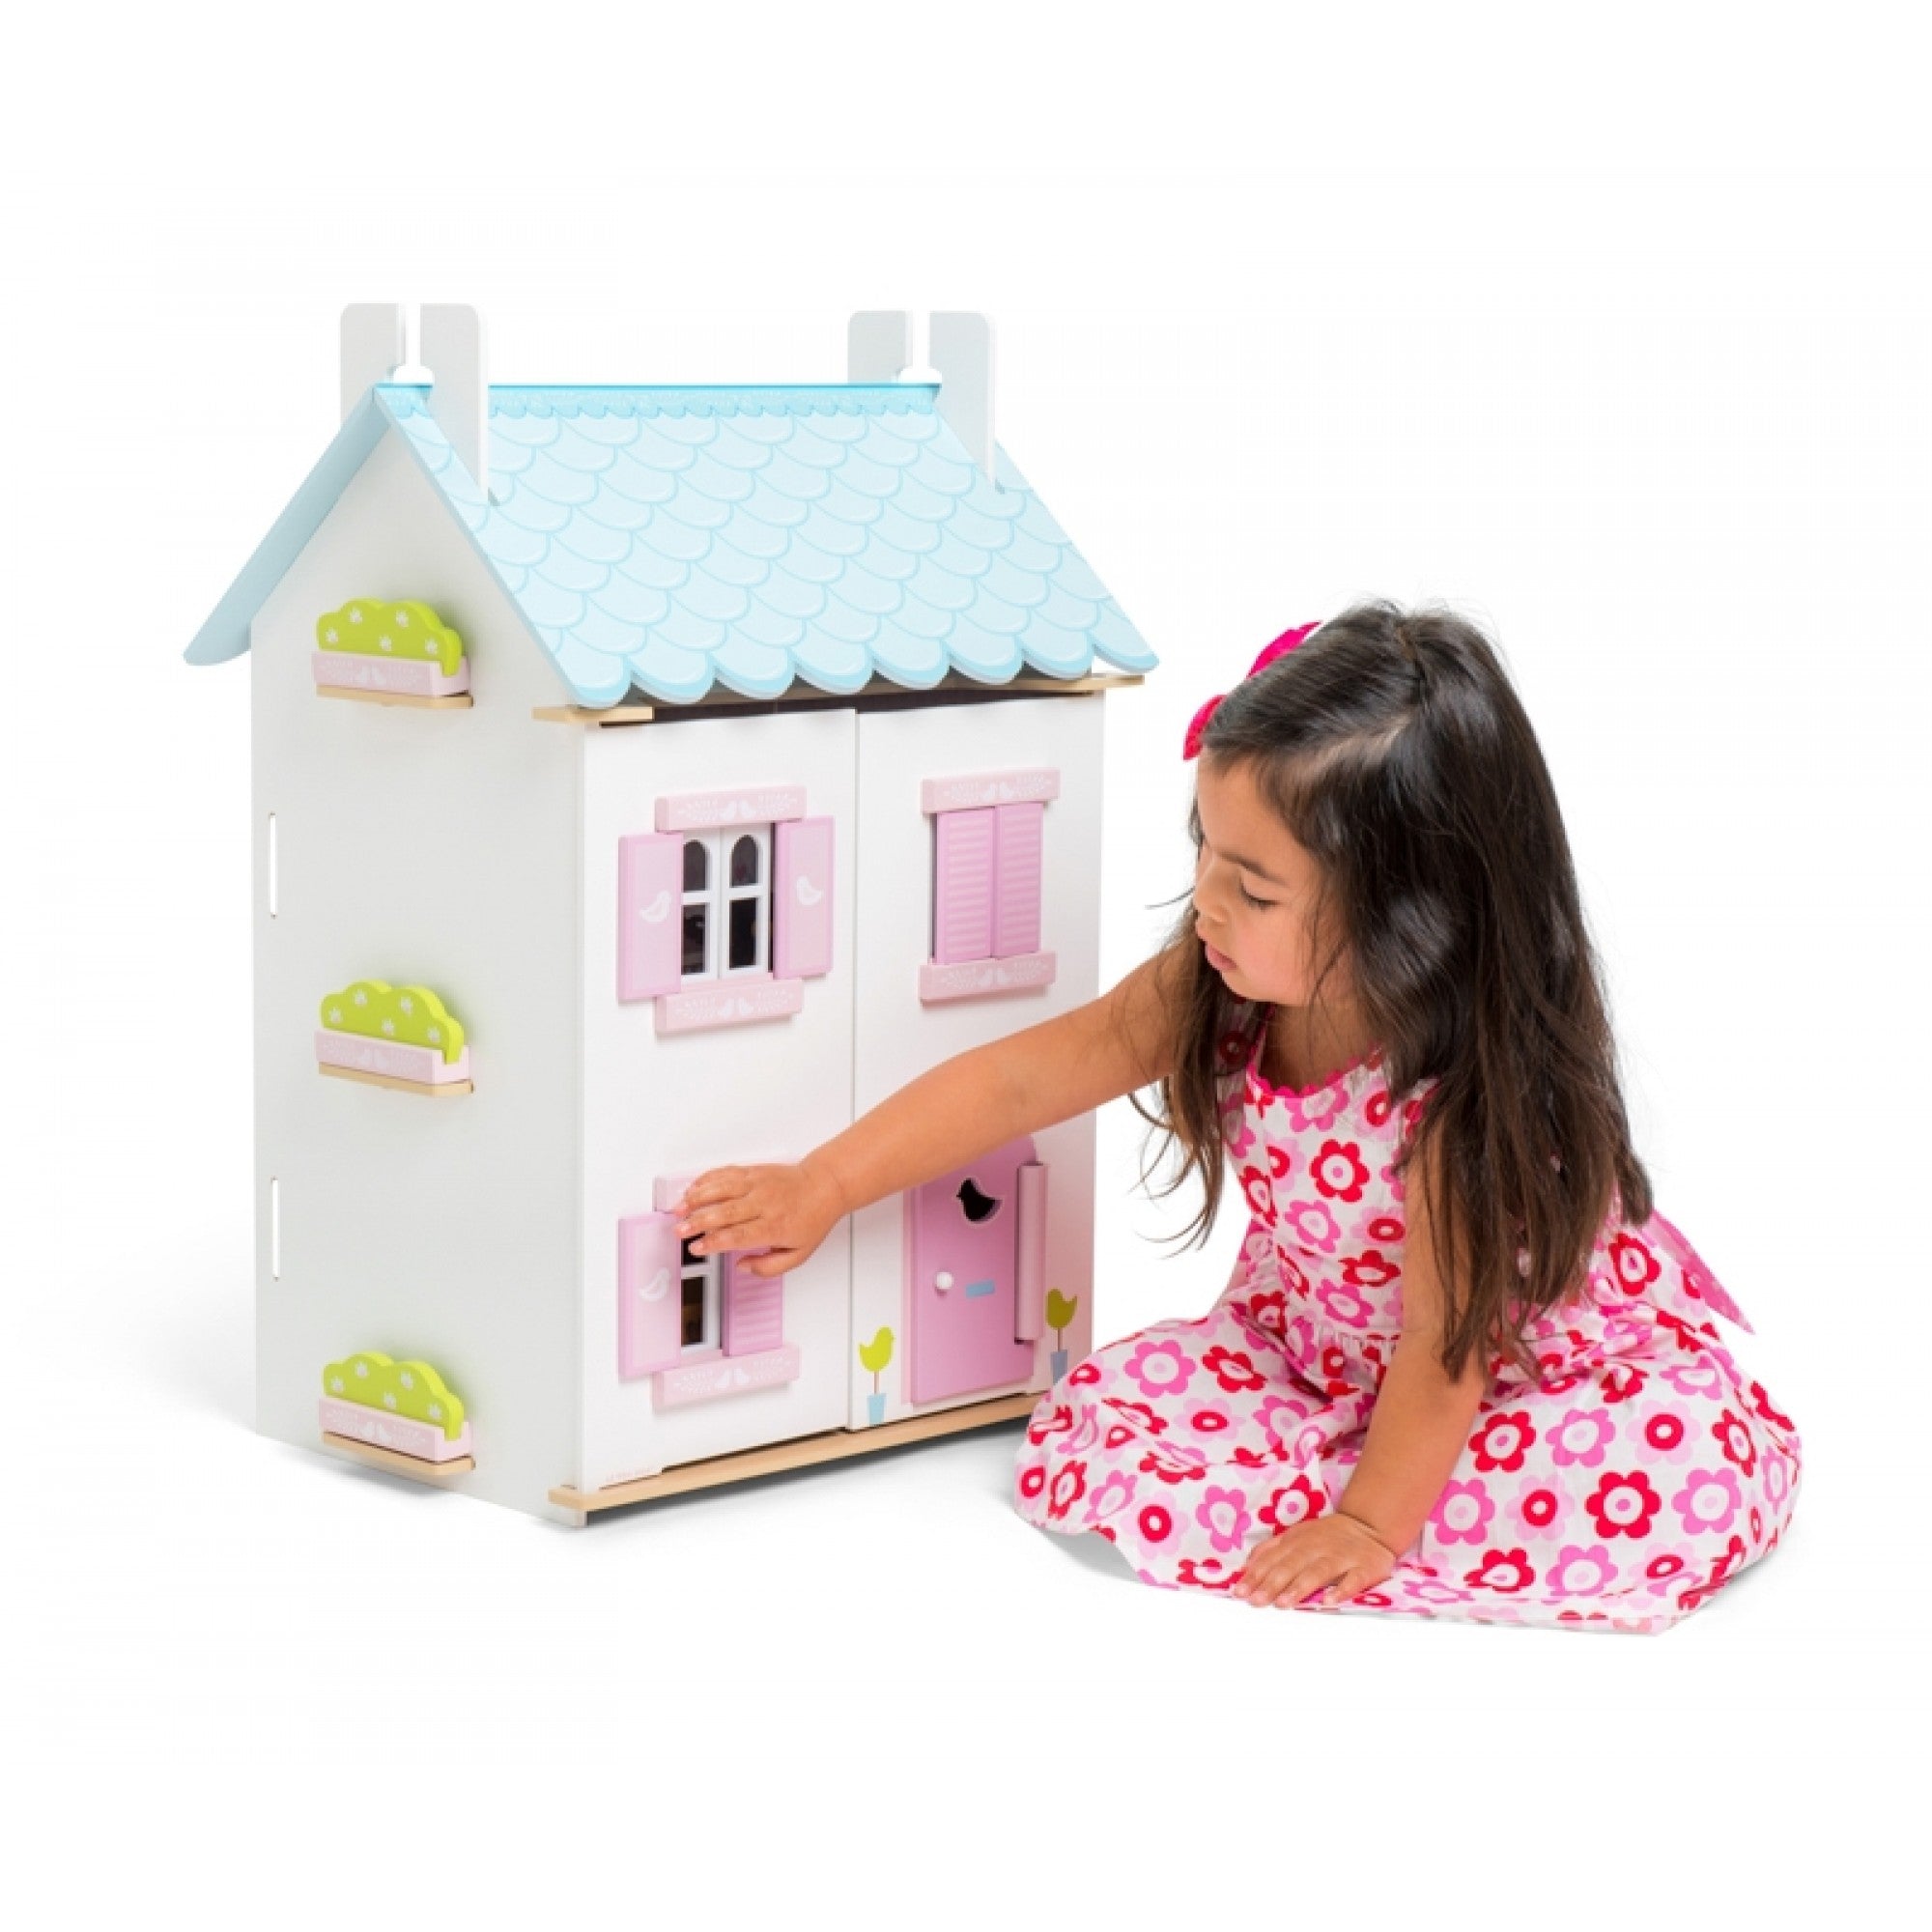 Daisy Lane Blue Bird Cottage Dollhouse with Furniture - Le Toy Van